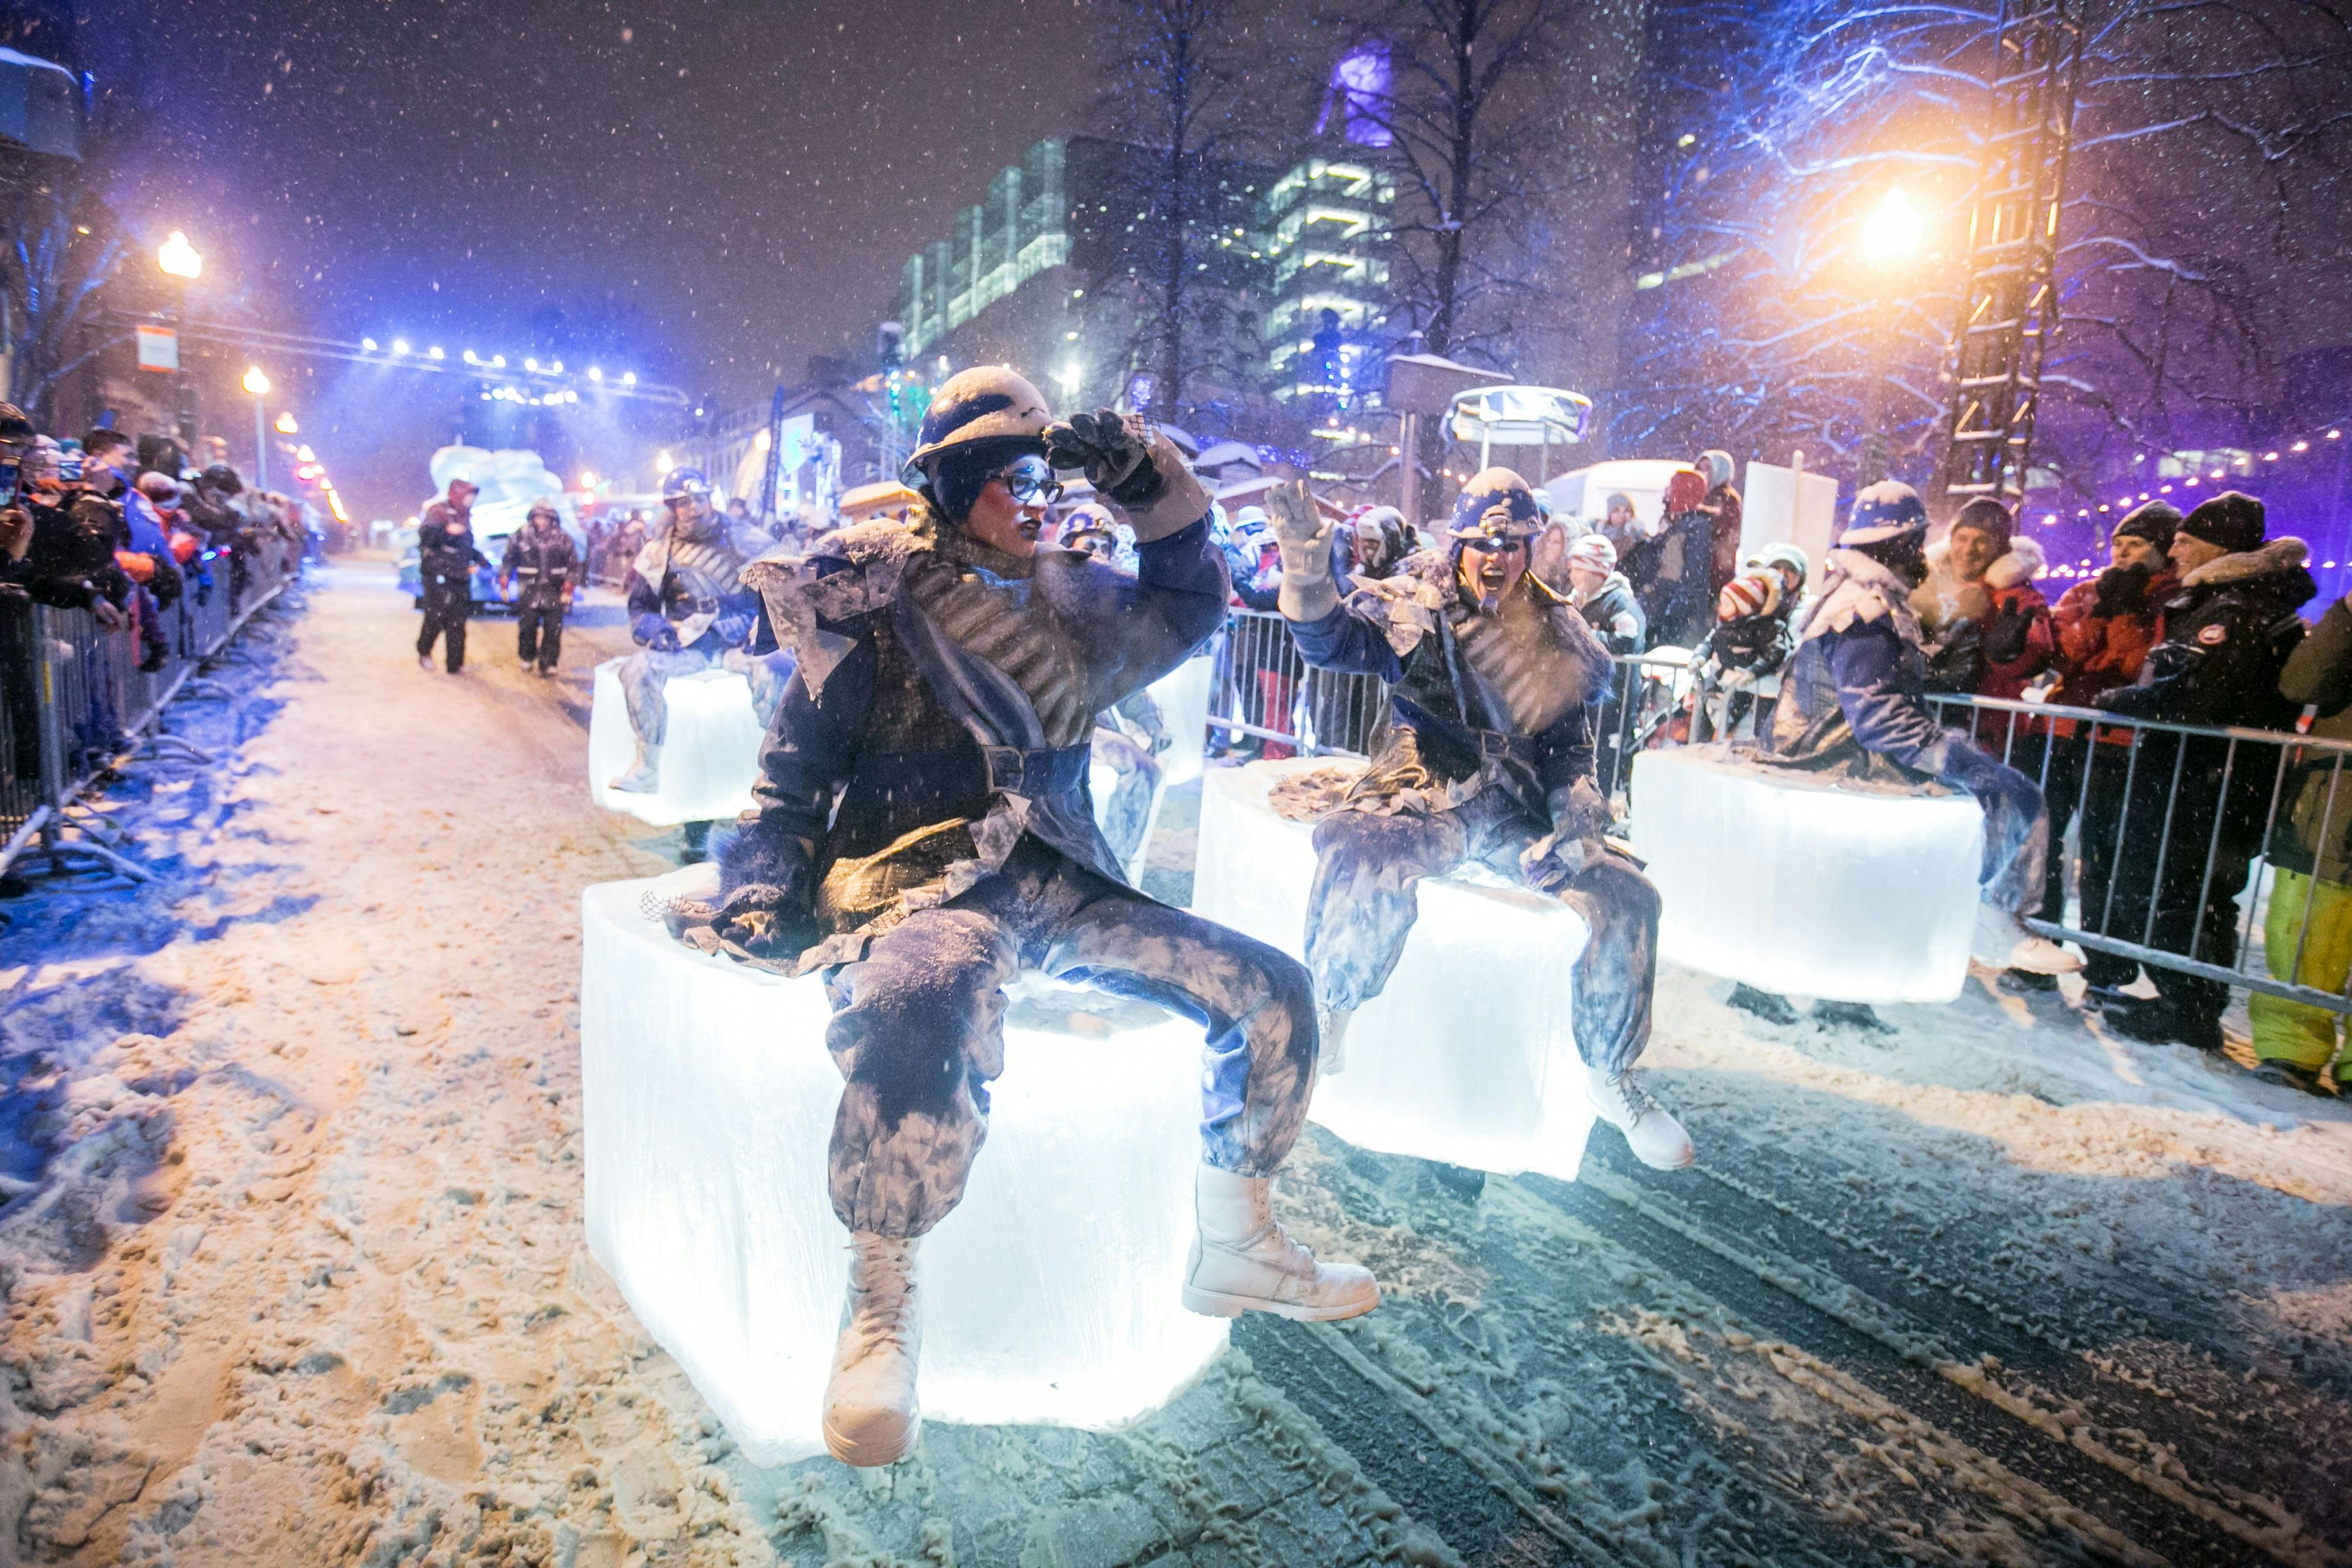 People in winter clothing in a parade, sitting on top of glowing cubes with snow on the ground and spectators lining the street